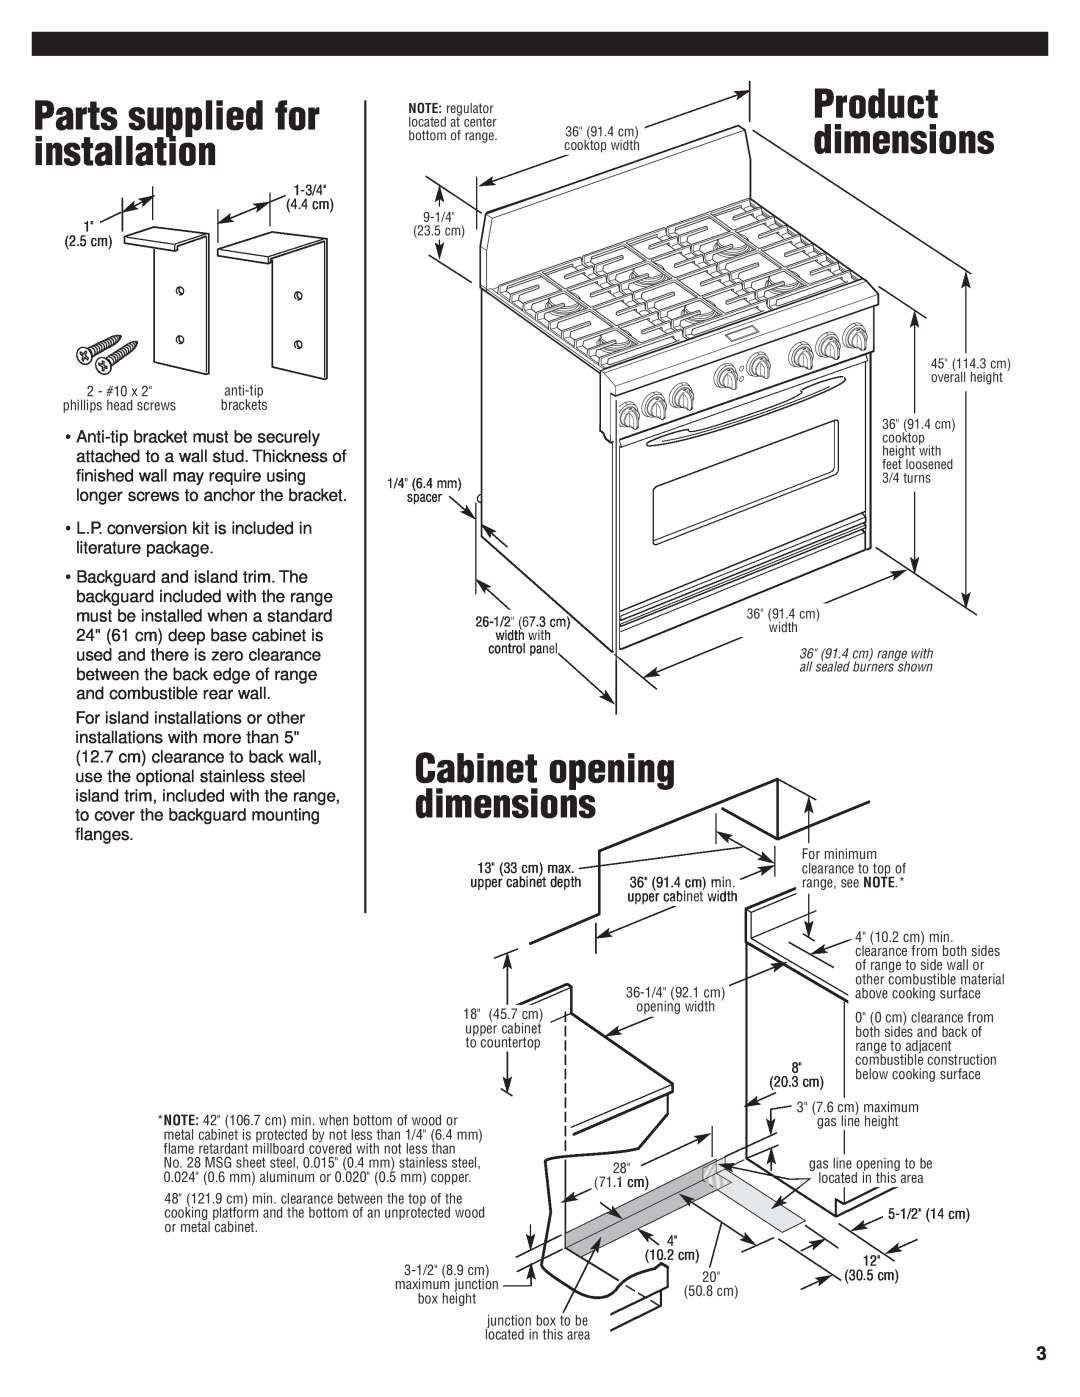 KitchenAid 8301169 Parts supplied for installation, Product dimensions, Cabinet opening dimensions 